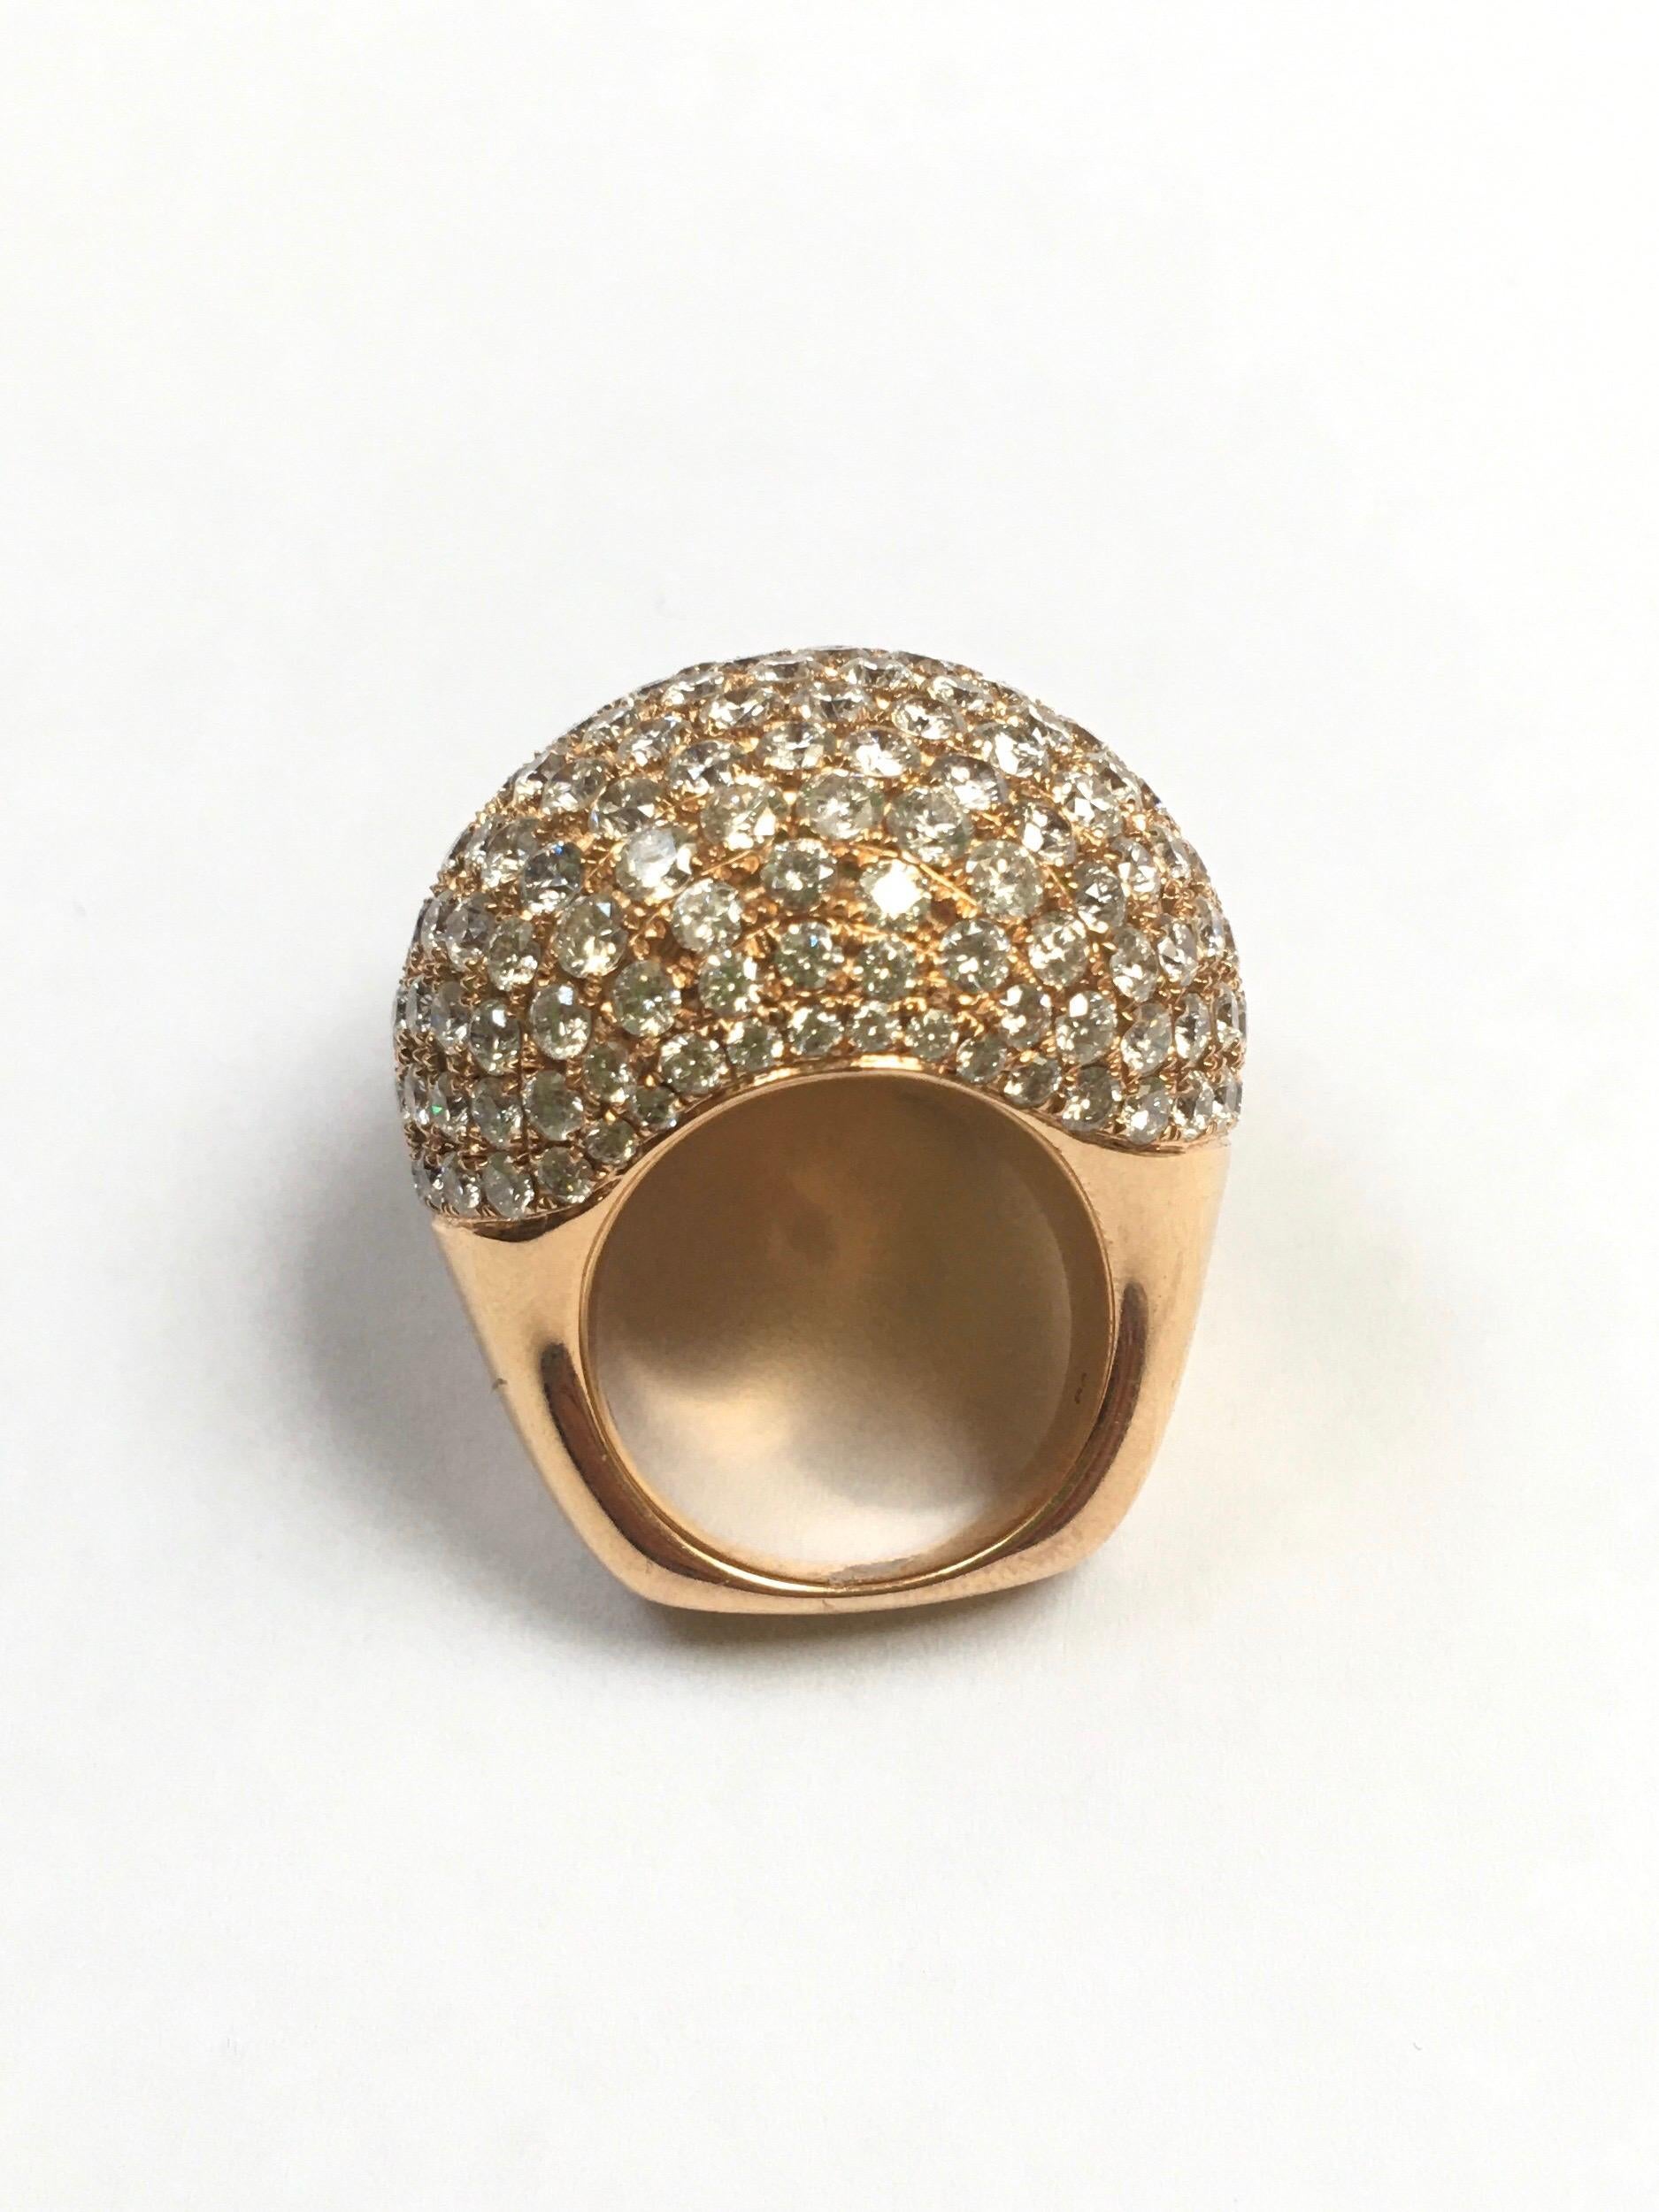 13.79 Carat Round Cut Diamond Bombe Ring in 18 Karat Rose Gold In Excellent Condition For Sale In London, GB